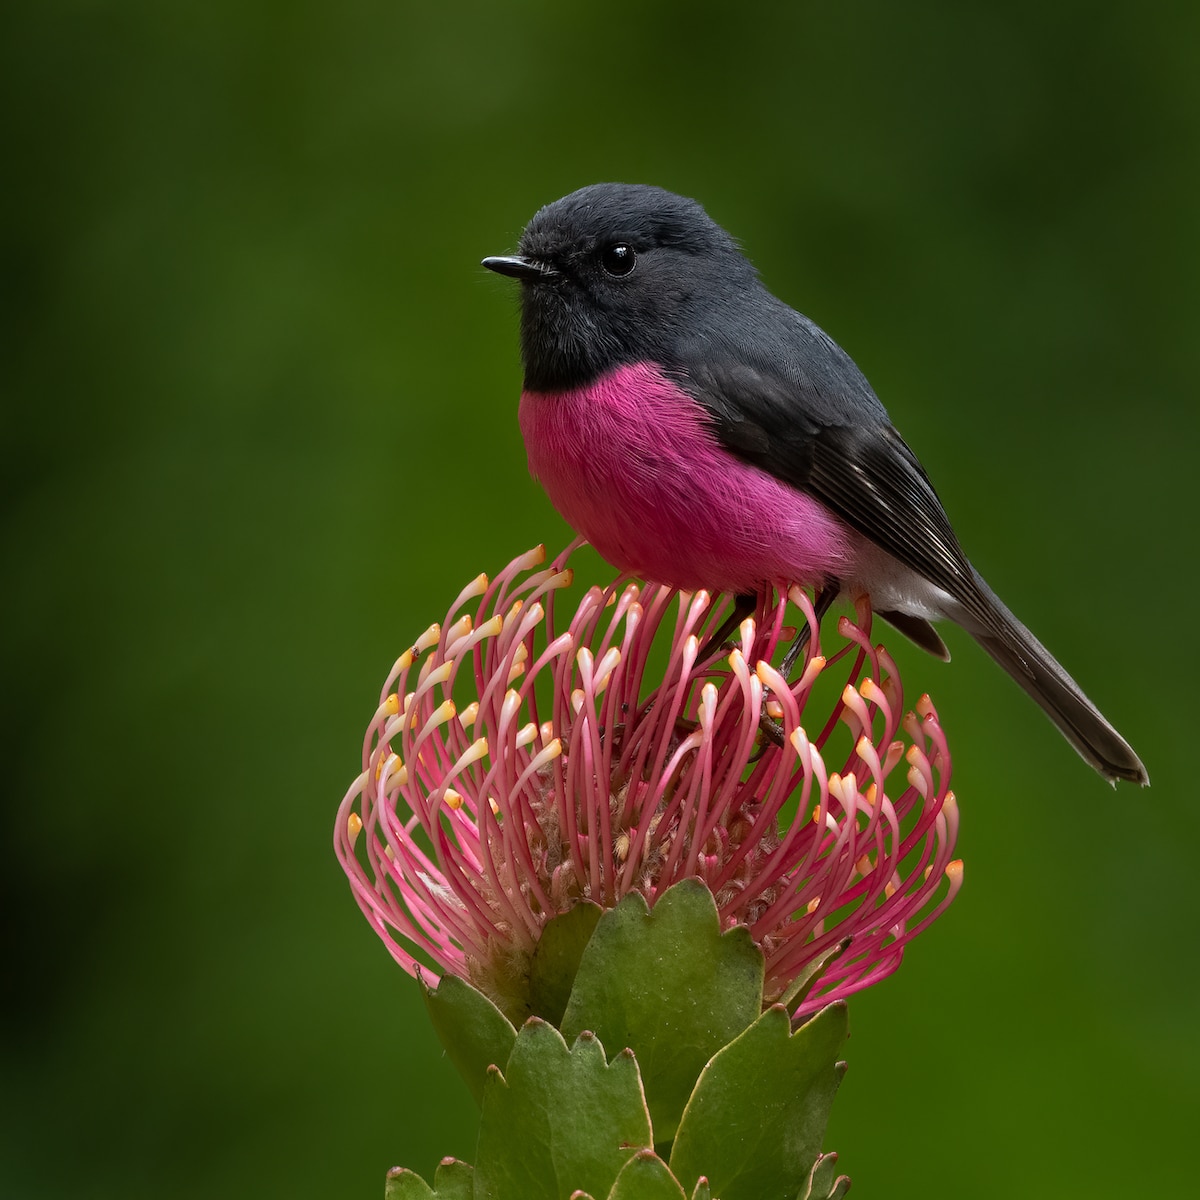 Pink Robin Perched on a Flower